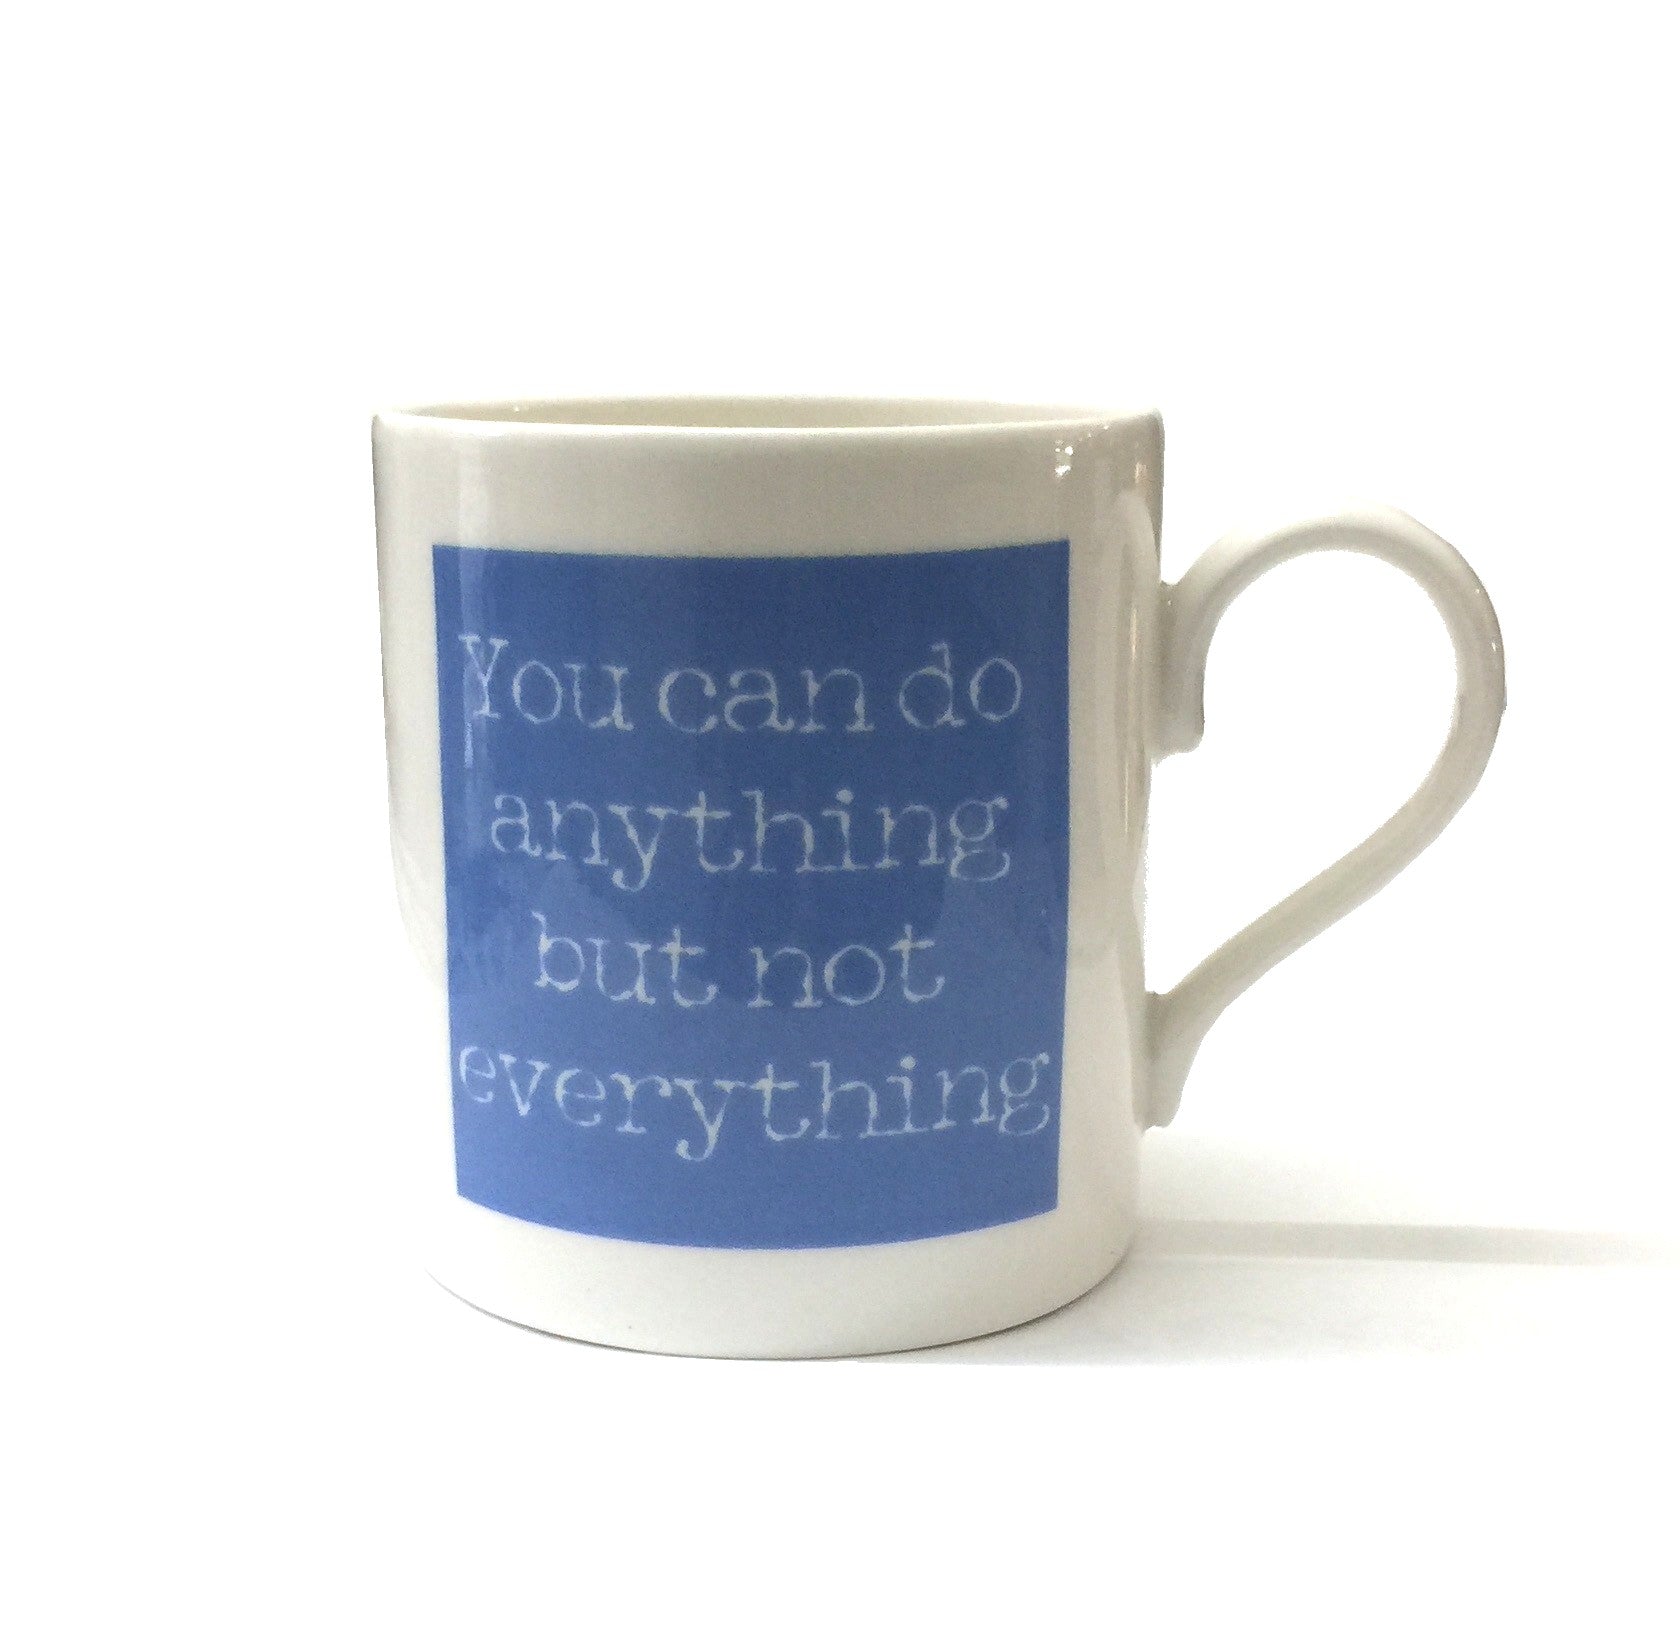 "You Can Do Anything" Mug - The Nancy Smillie Shop - Art, Jewellery & Designer Gifts Glasgow